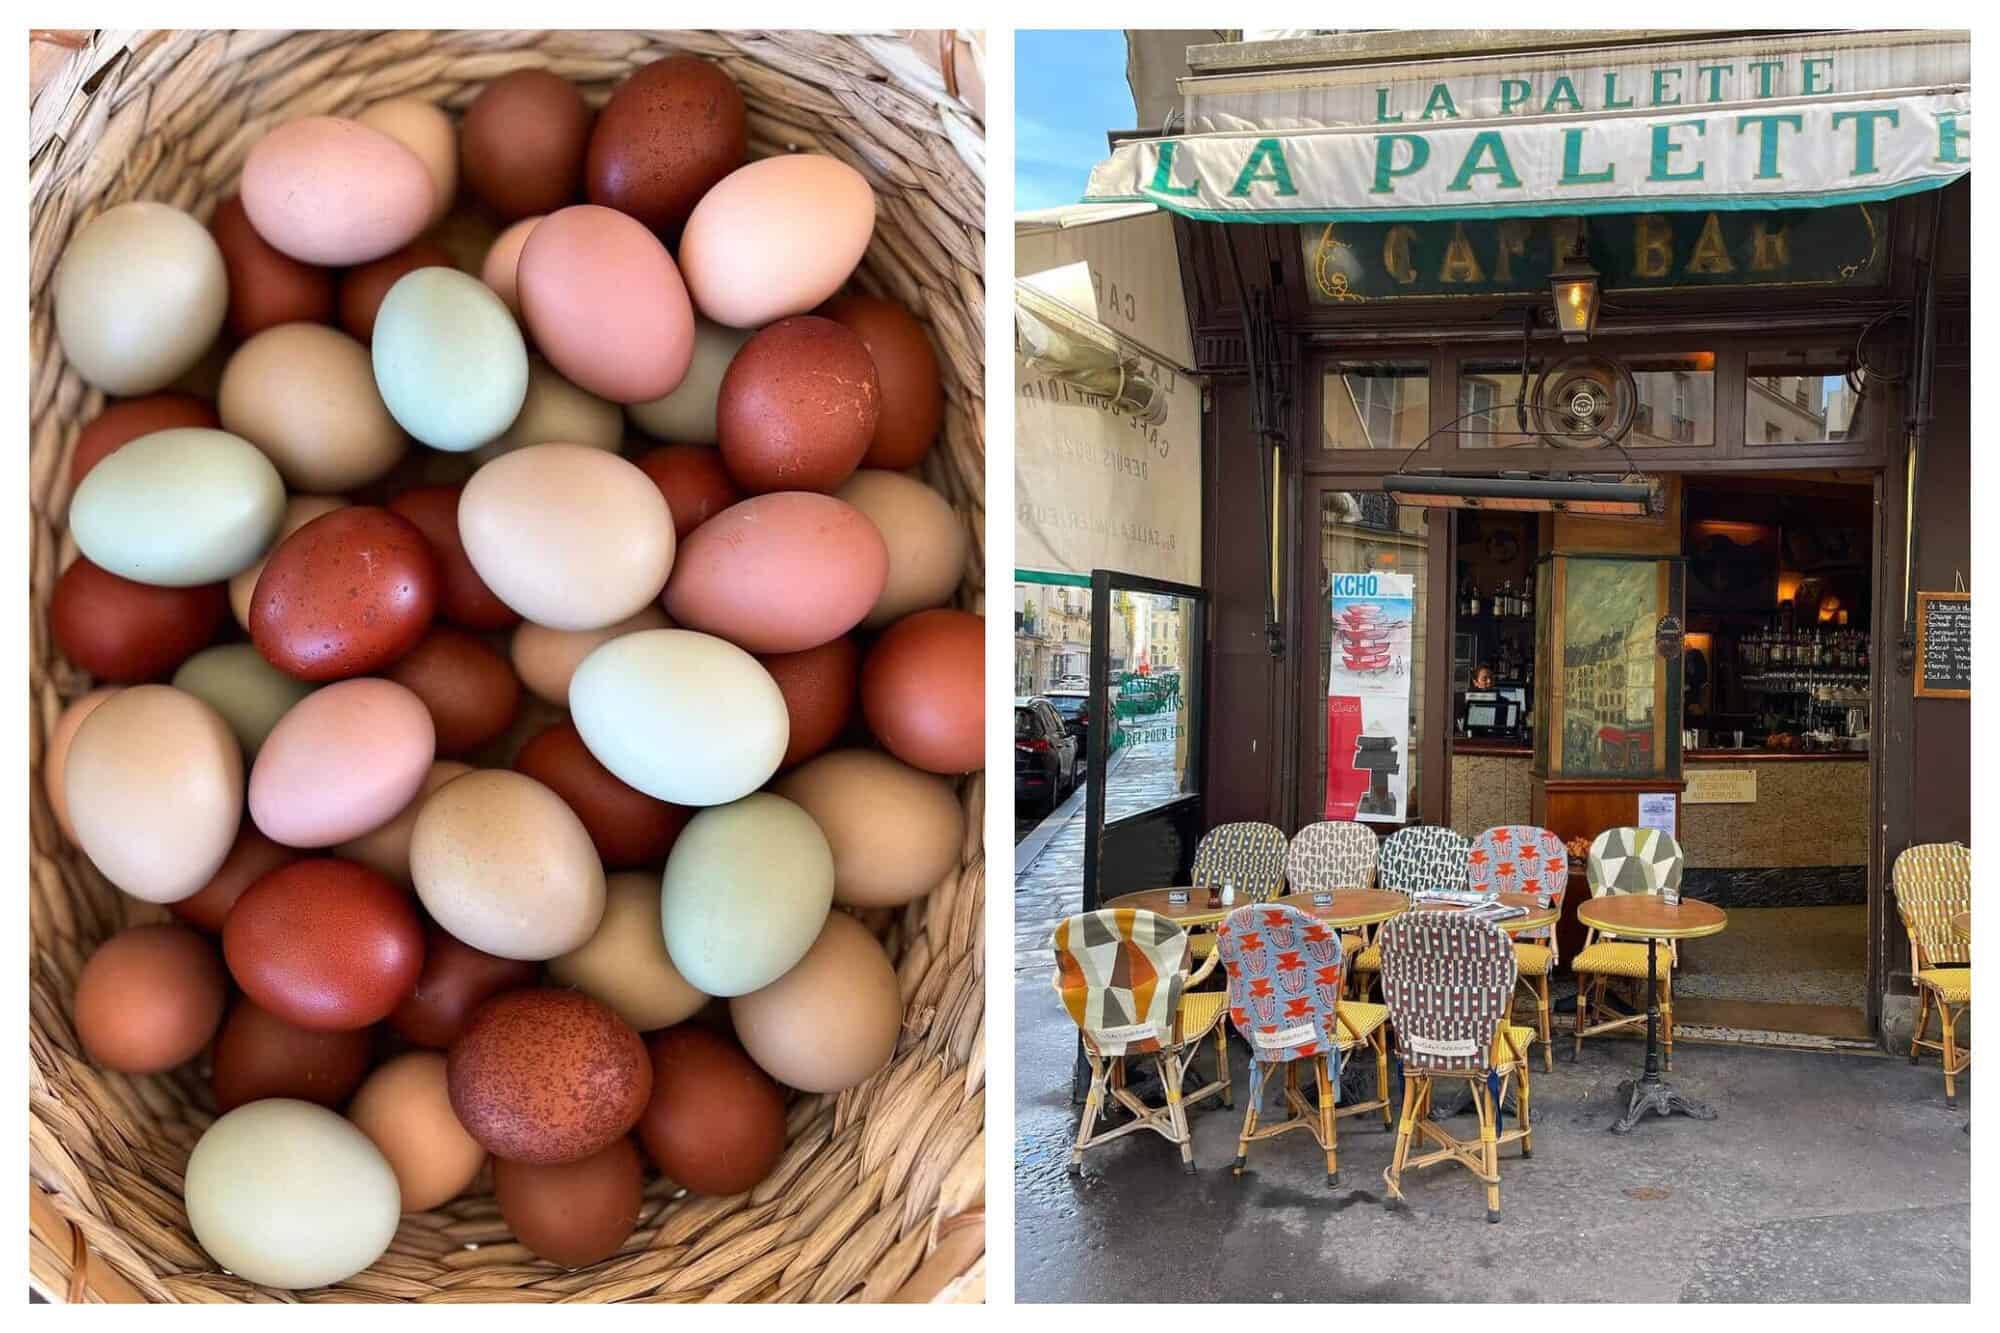 Left: A basket full of brown, pink, red, and blue eggs. Right: A café with dark wooden walls, colorful chairs, and wooden tables.